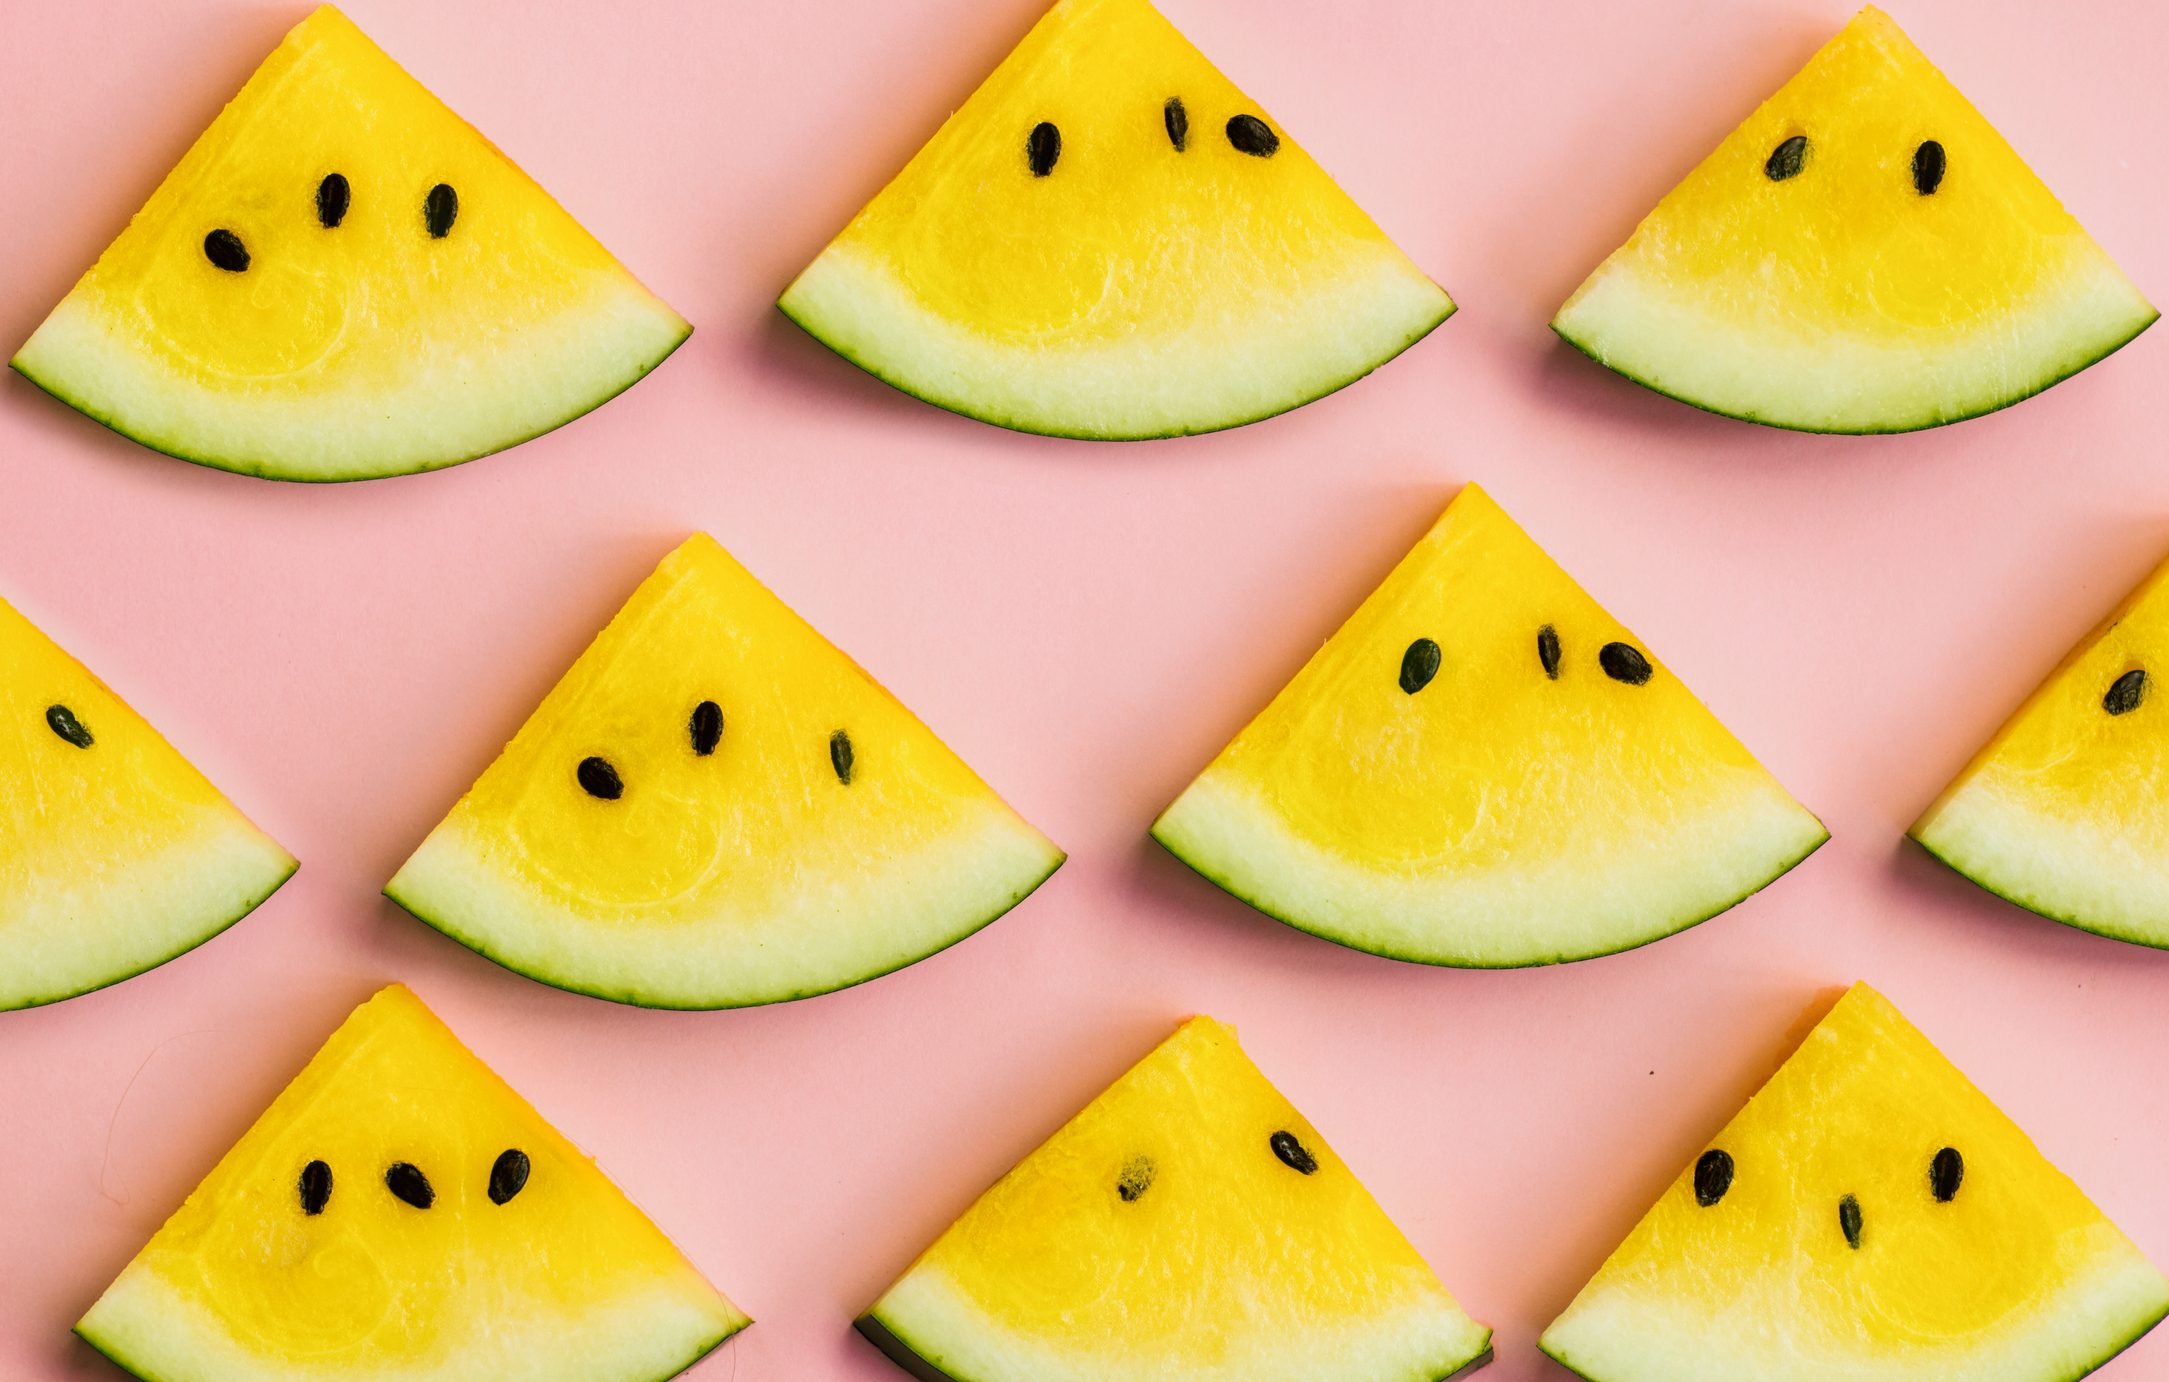 What Is Yellow Watermelon, and Where Can You Buy It?